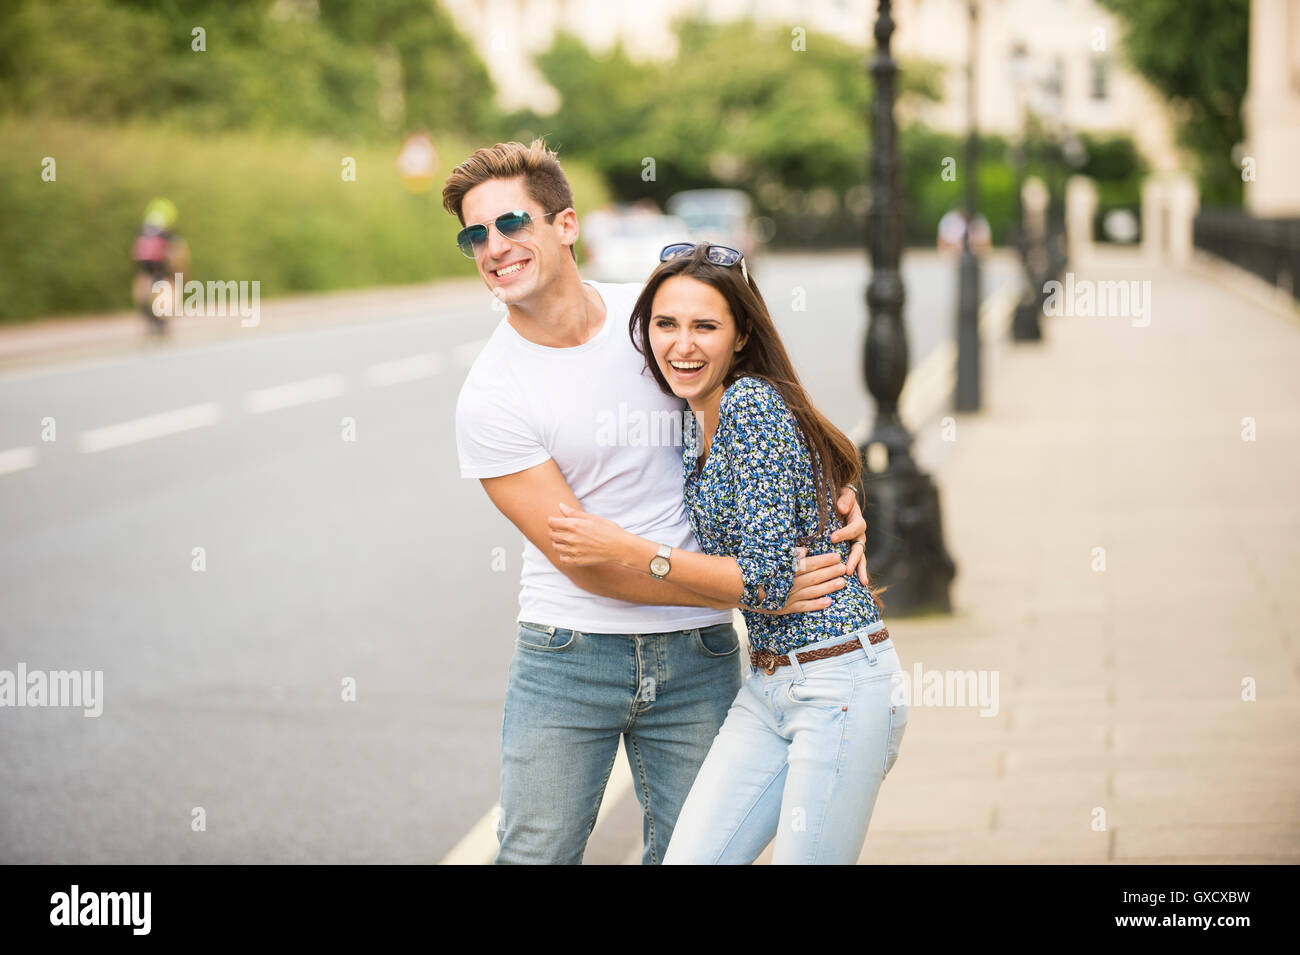 Young couple laughing on city Street, London, UK Banque D'Images